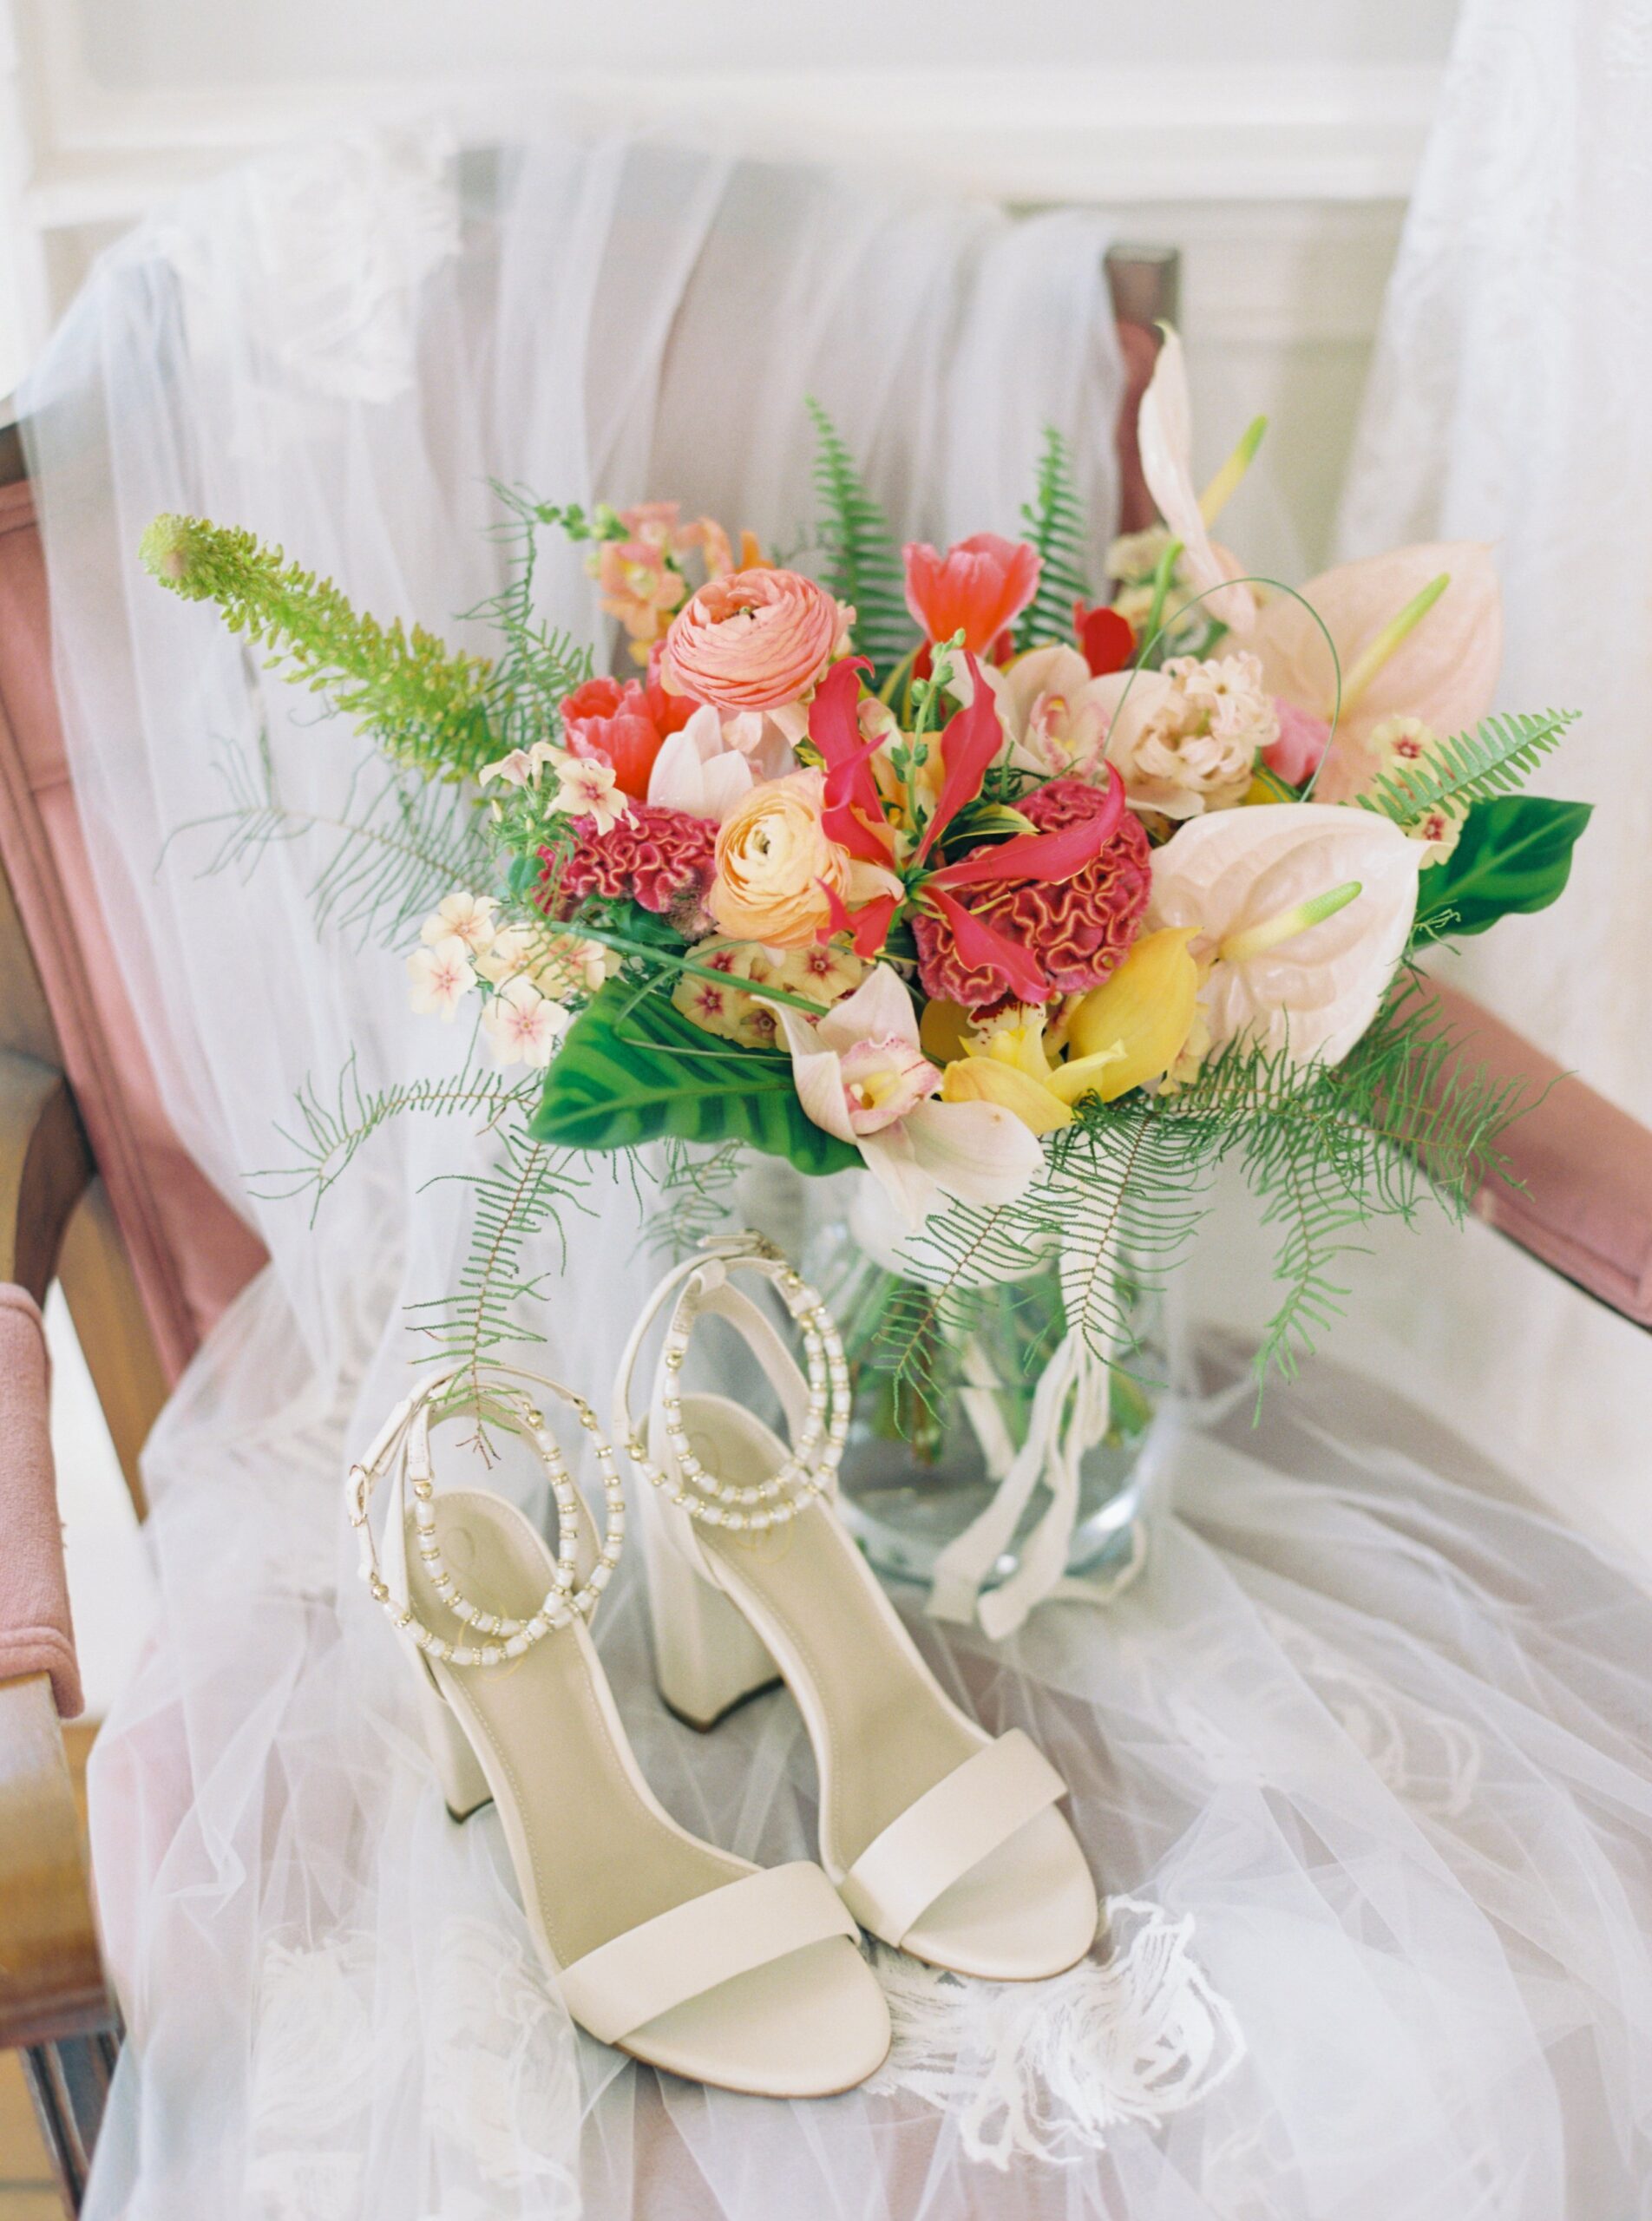 Bridal bouquet and heels laying on veil.